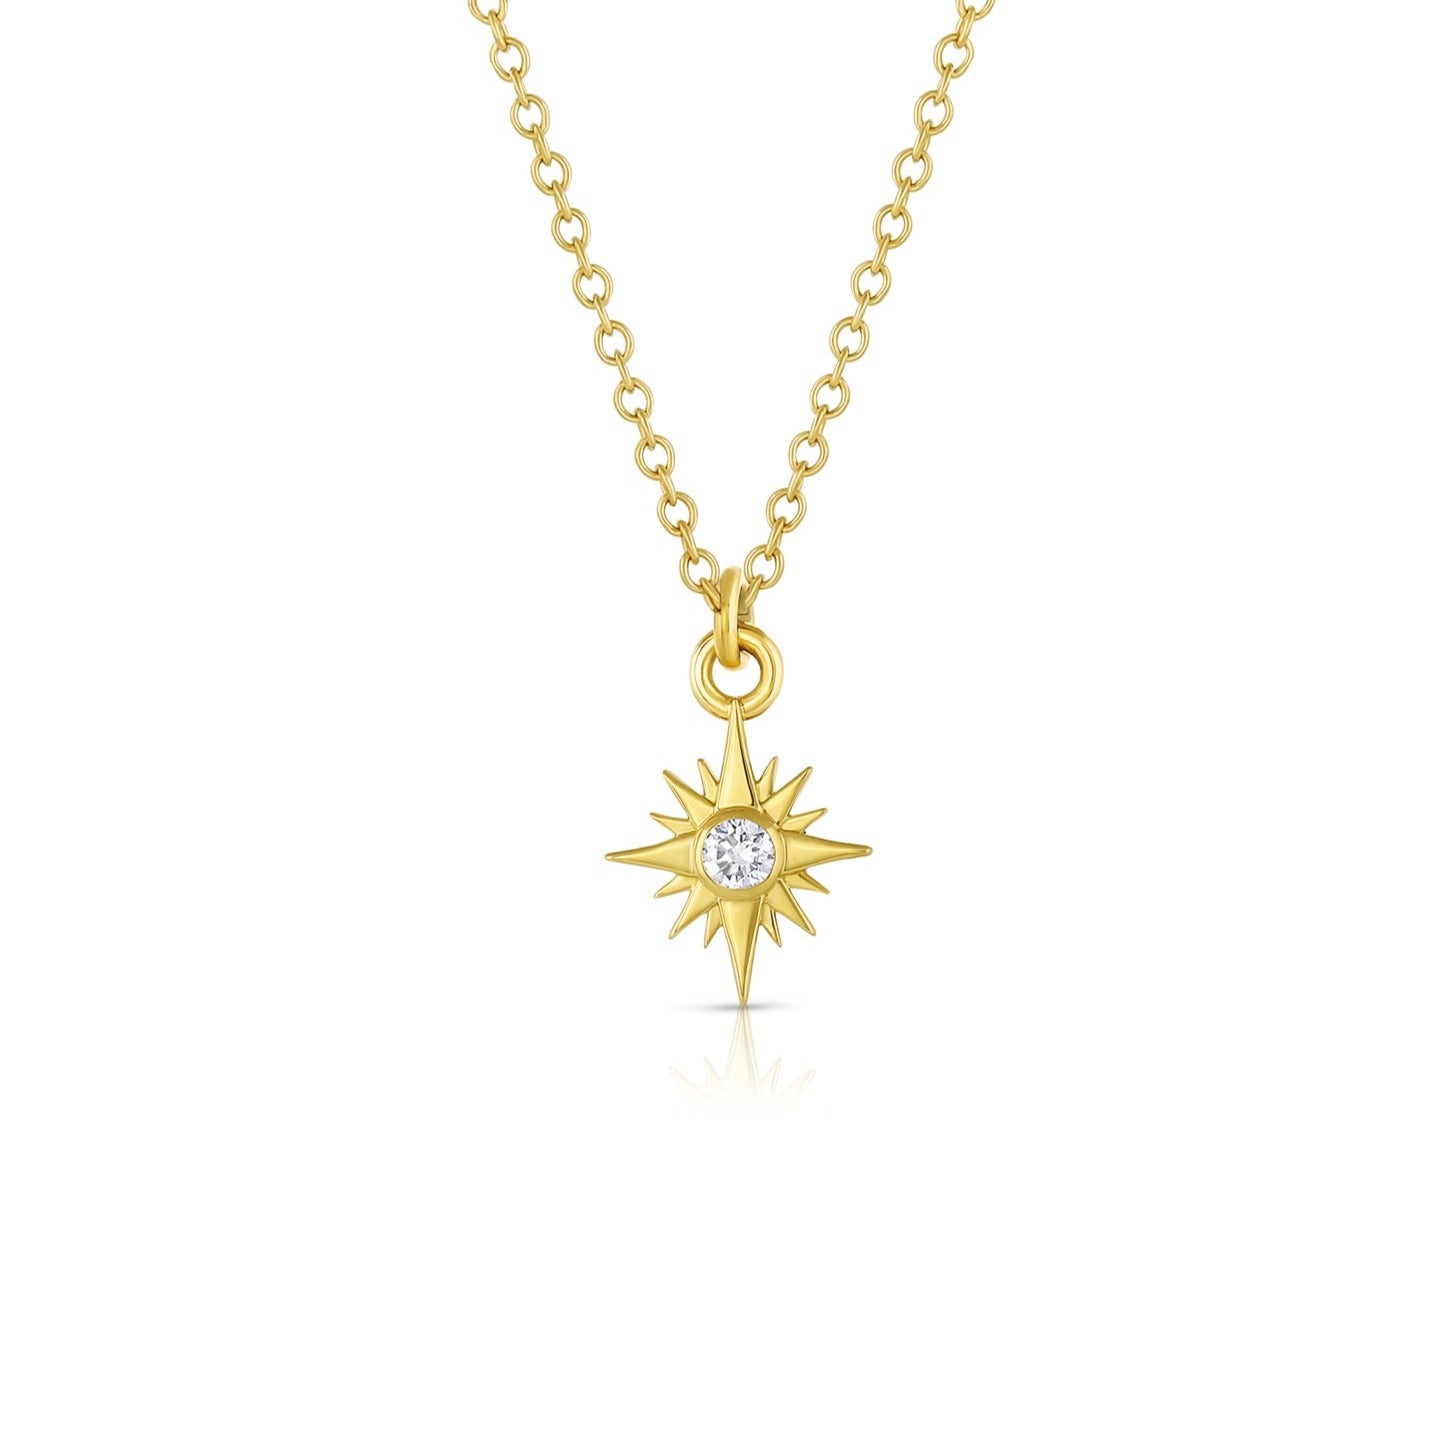 Load image into Gallery viewer, 18k yellow gold star charm with diamond center stone on gold chain with white background.
